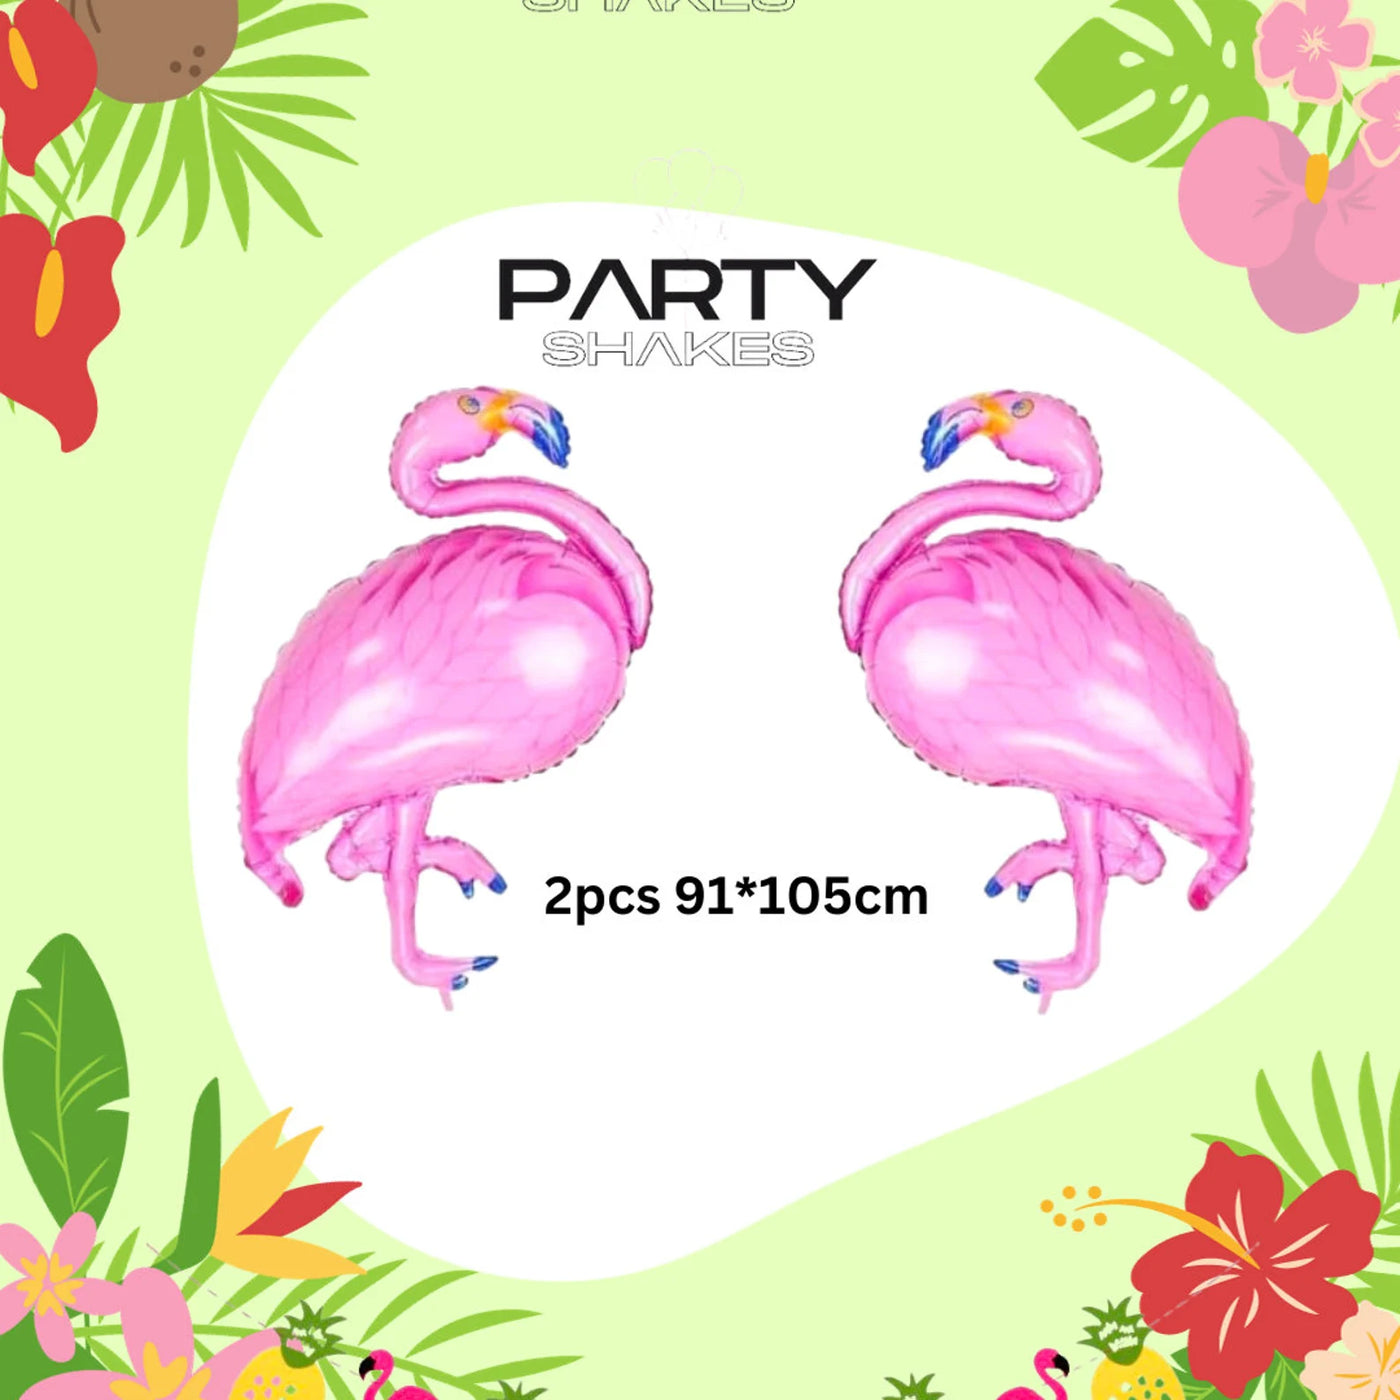 The Hawaiian Summer Party Decorations Set is a versatile choice for decorating walls, windows, fireplaces, and tables. It is a great addition to summer gatherings, Hawaiian or tropical-themed events, poolside parties, barbecues, birthdays, homecomings, graduations, baby showers, weddings, and more.